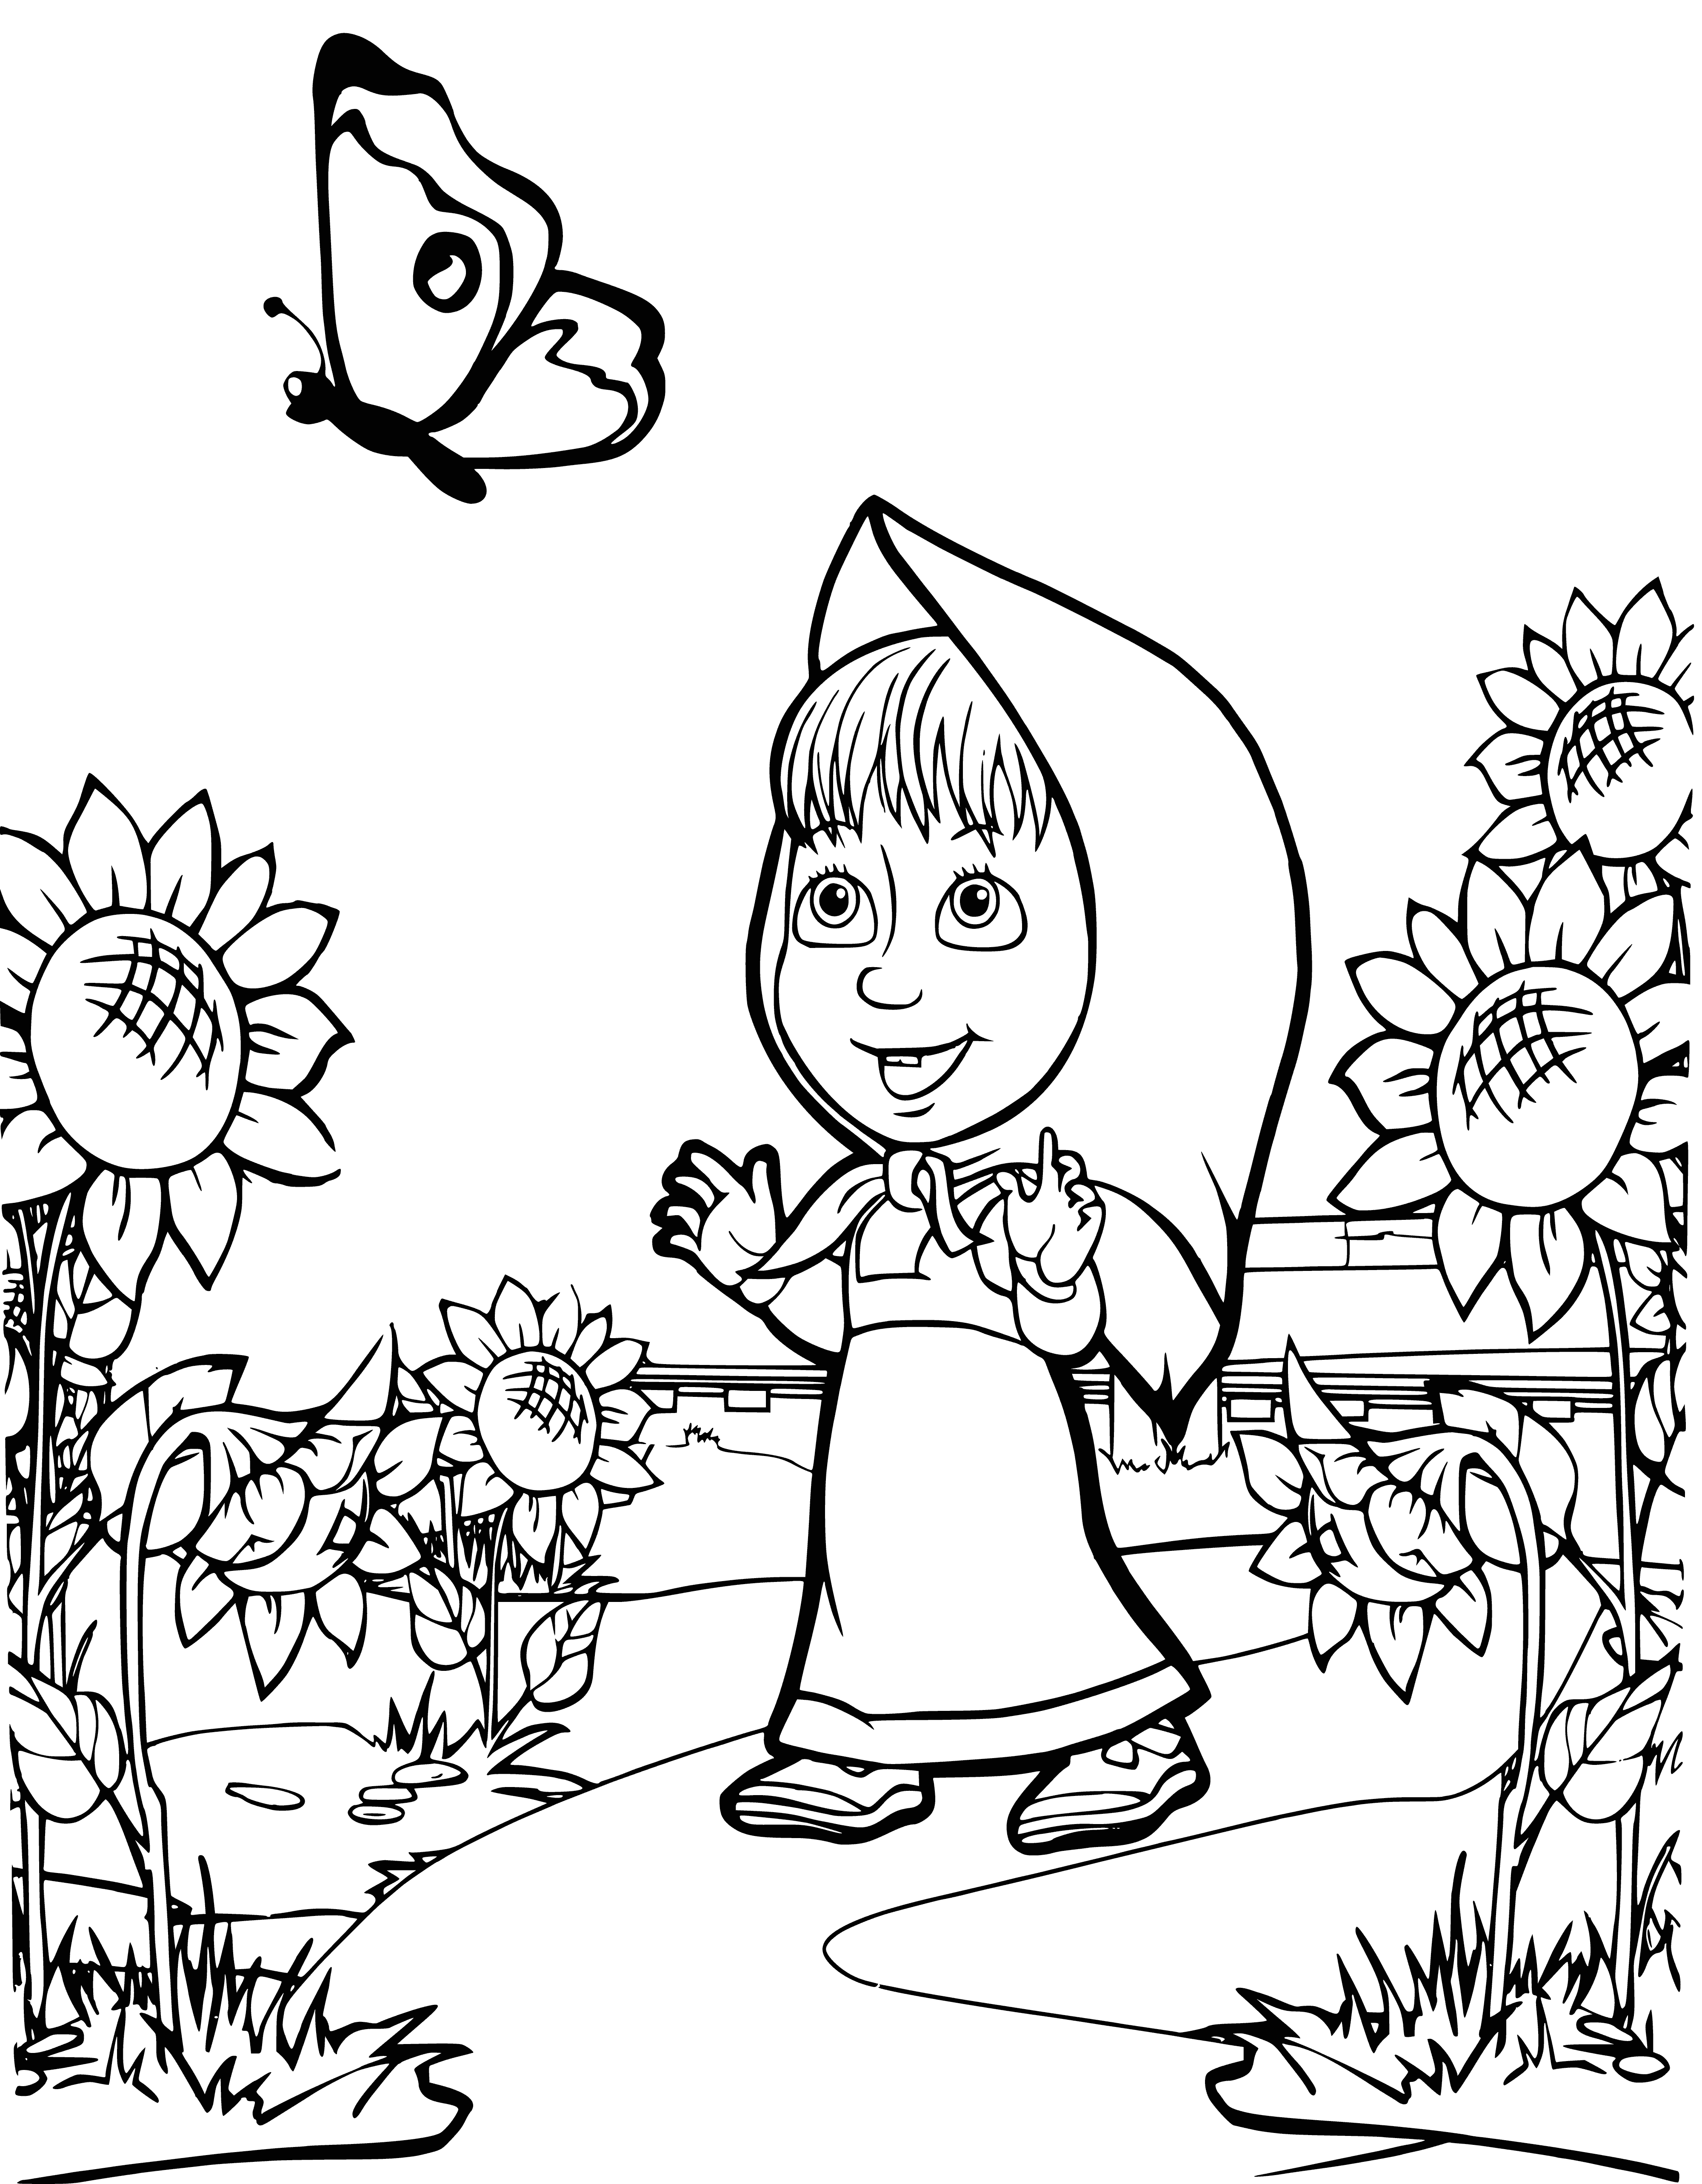 coloring page: Masha has a butterfly net, wearing a purple dress, and is surrounded by butterflies in the coloring page.